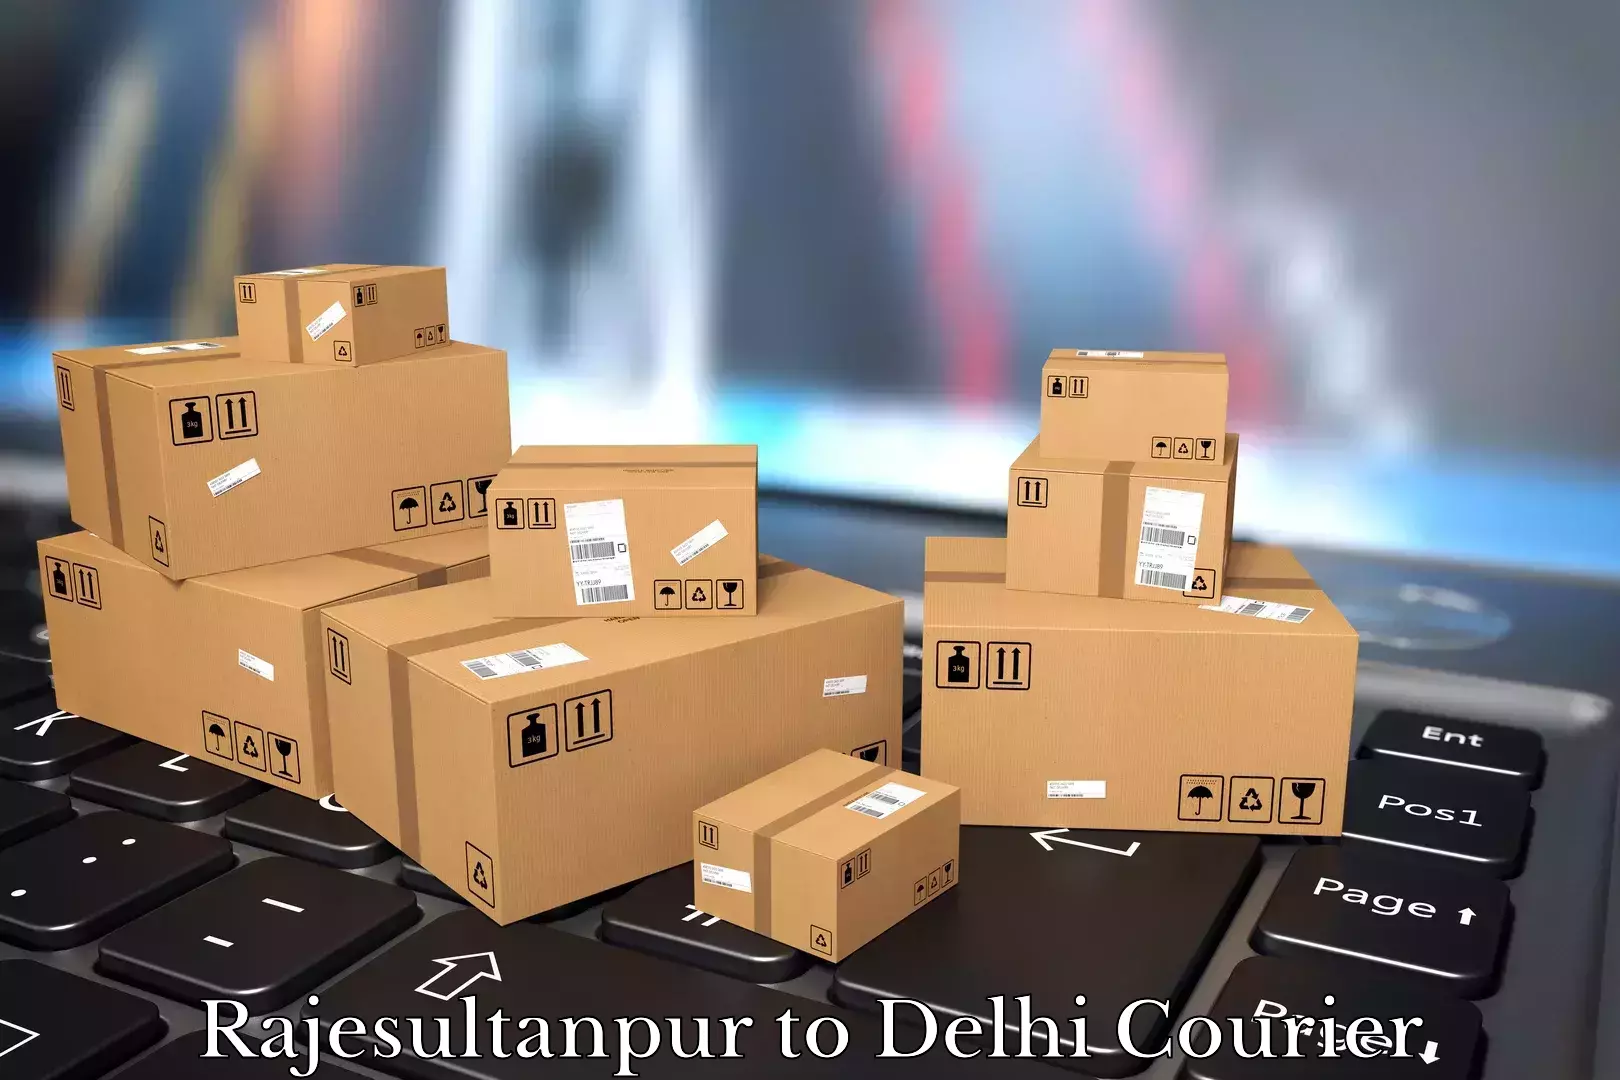 Full-service movers Rajesultanpur to East Delhi